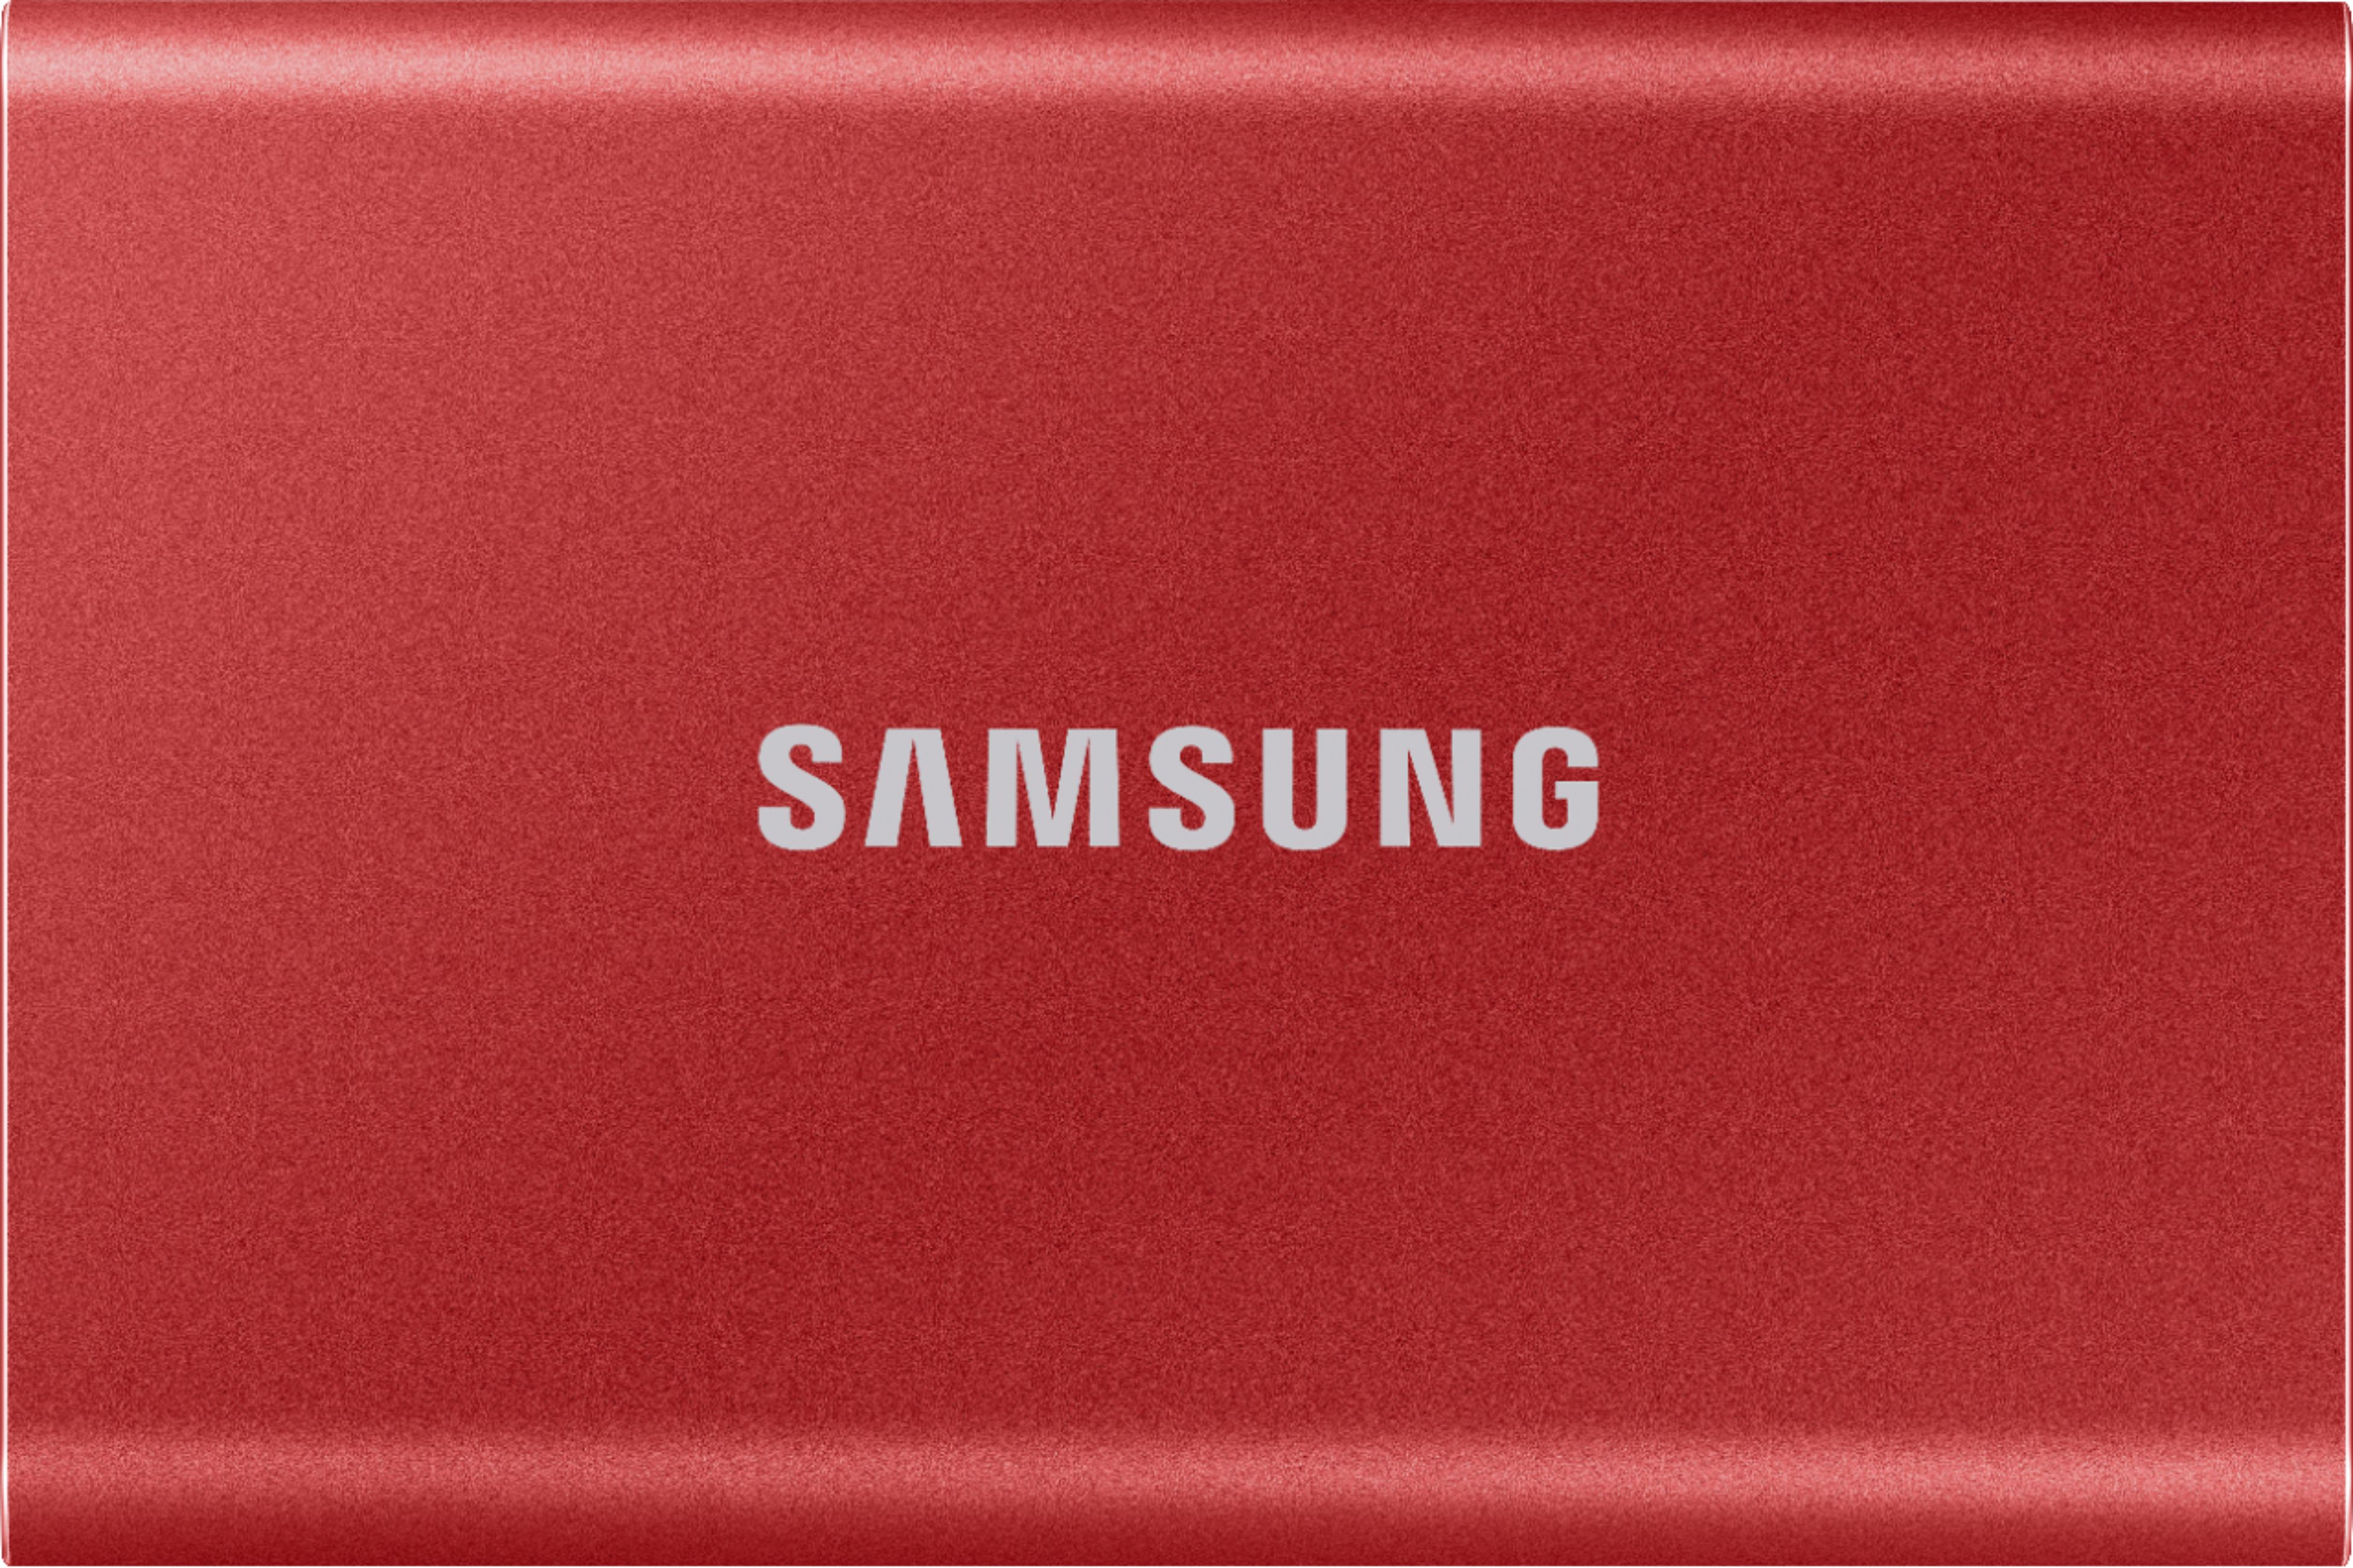 Samsung - T7 2TB External USB 3.2 Gen 2 Portable Solid State Drive with Hardware Encryption - Metallic Red